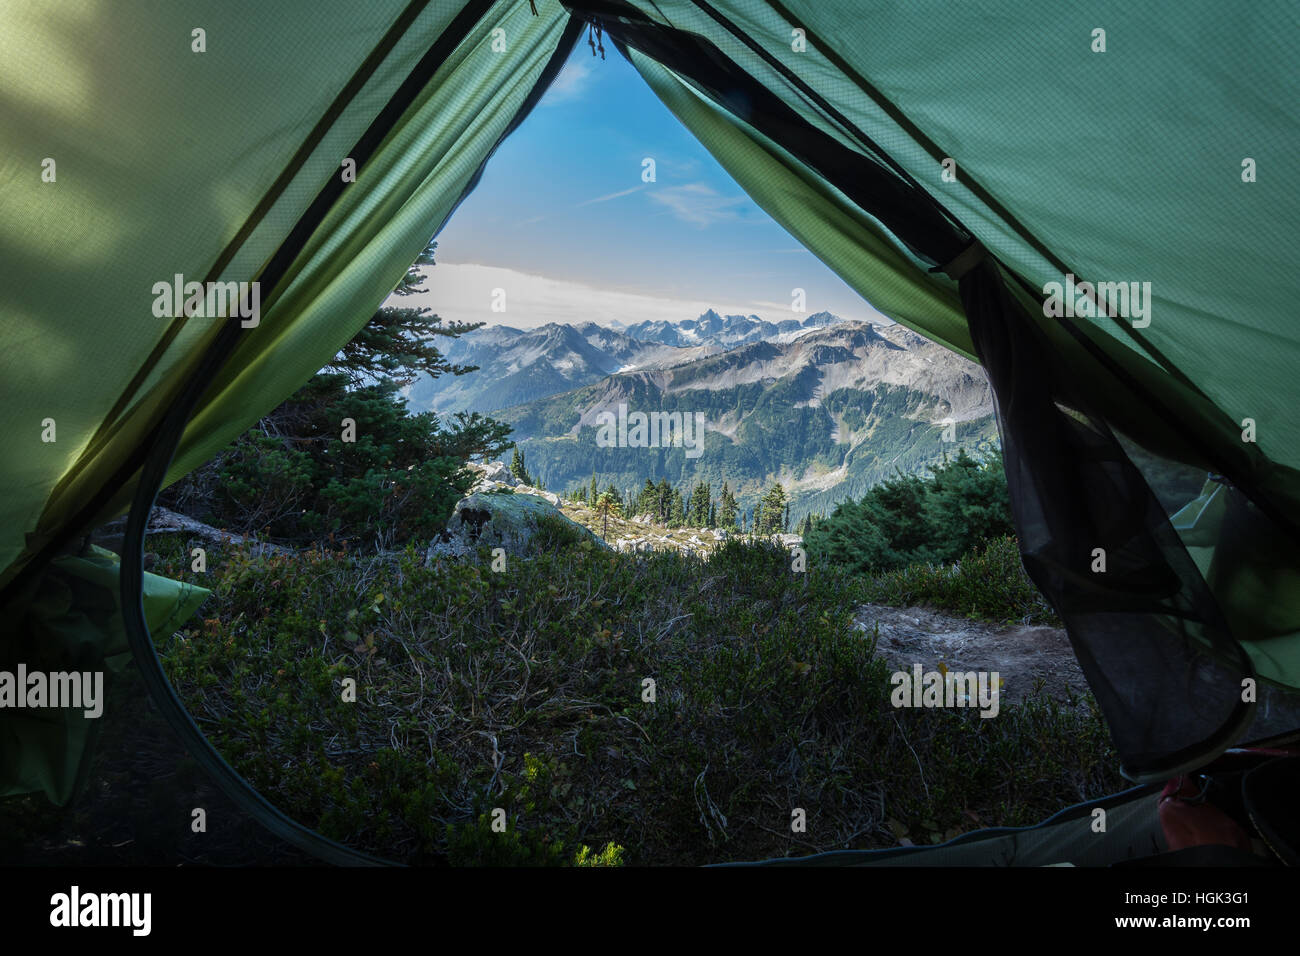 Looking out of a tent door to the mountains. Stock Photo